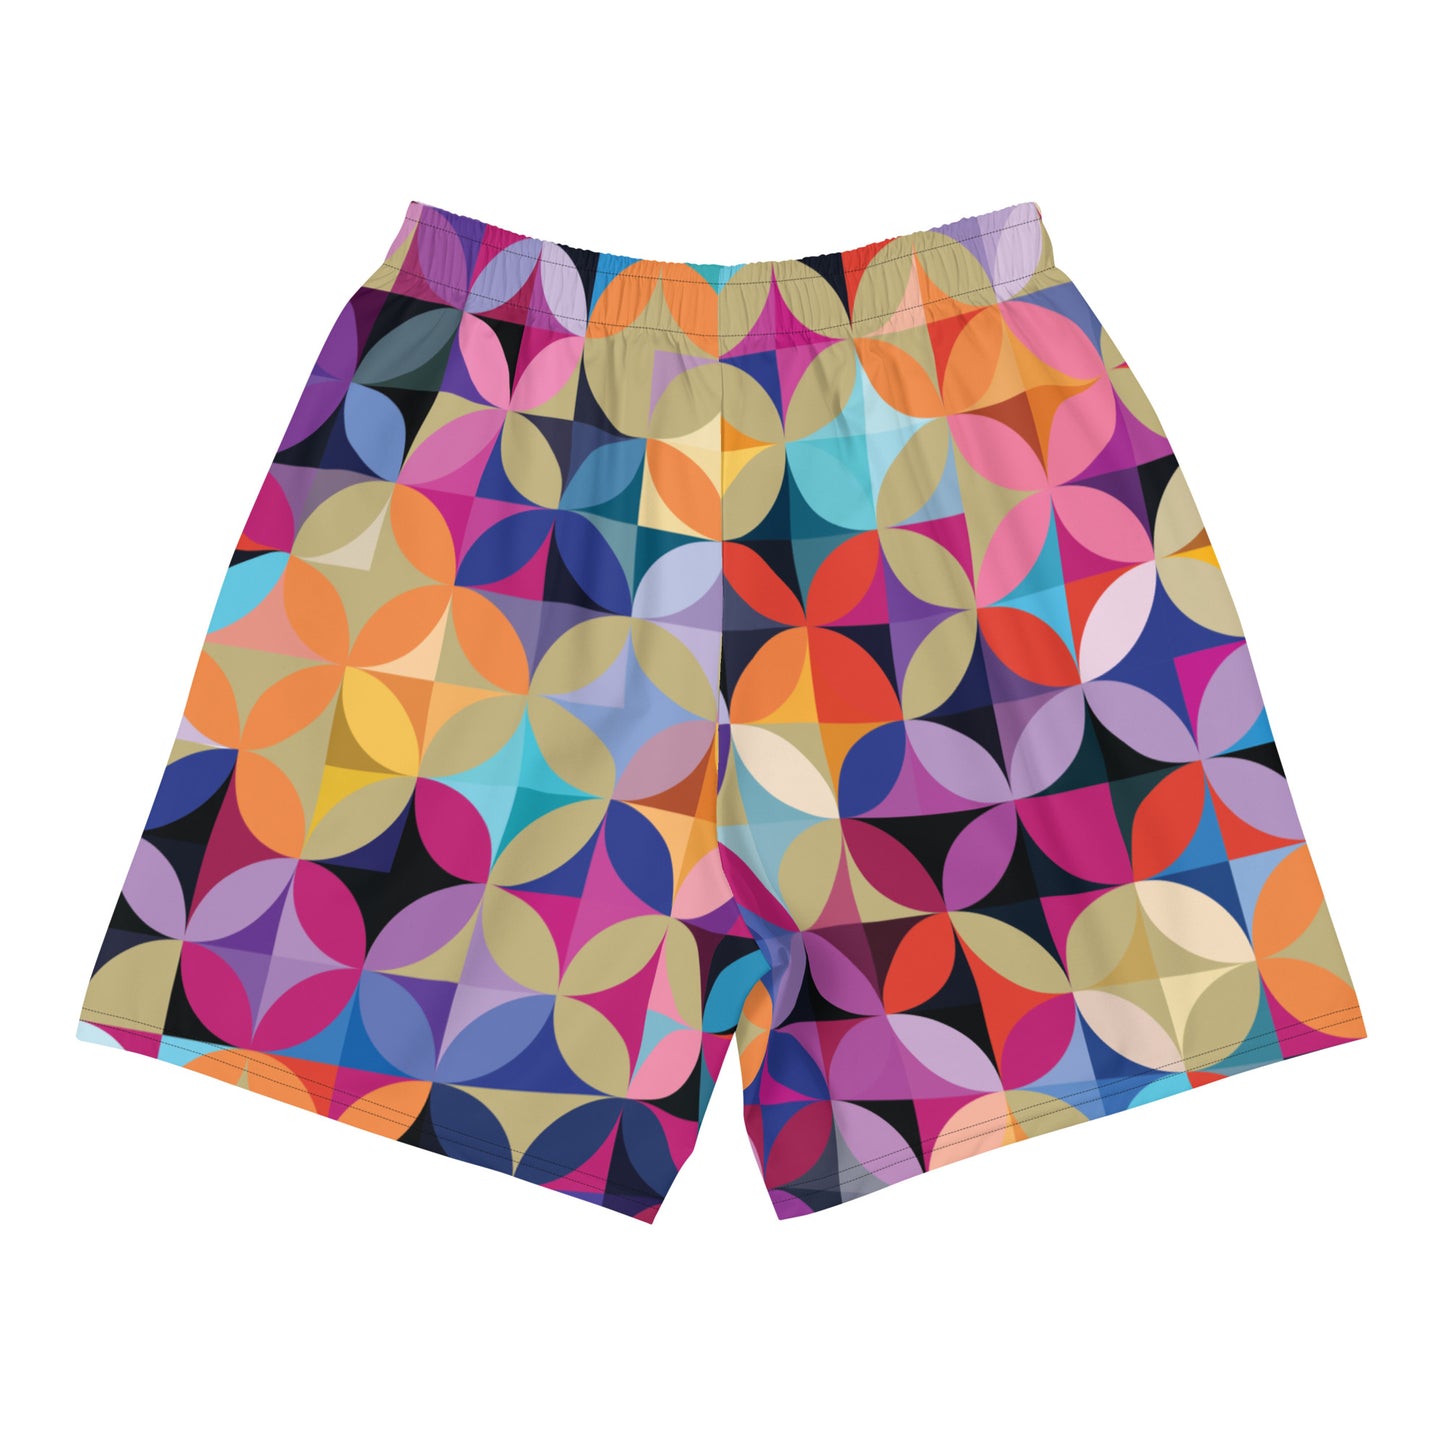 Multicolor Illusions - Sustainably Made Men's Short